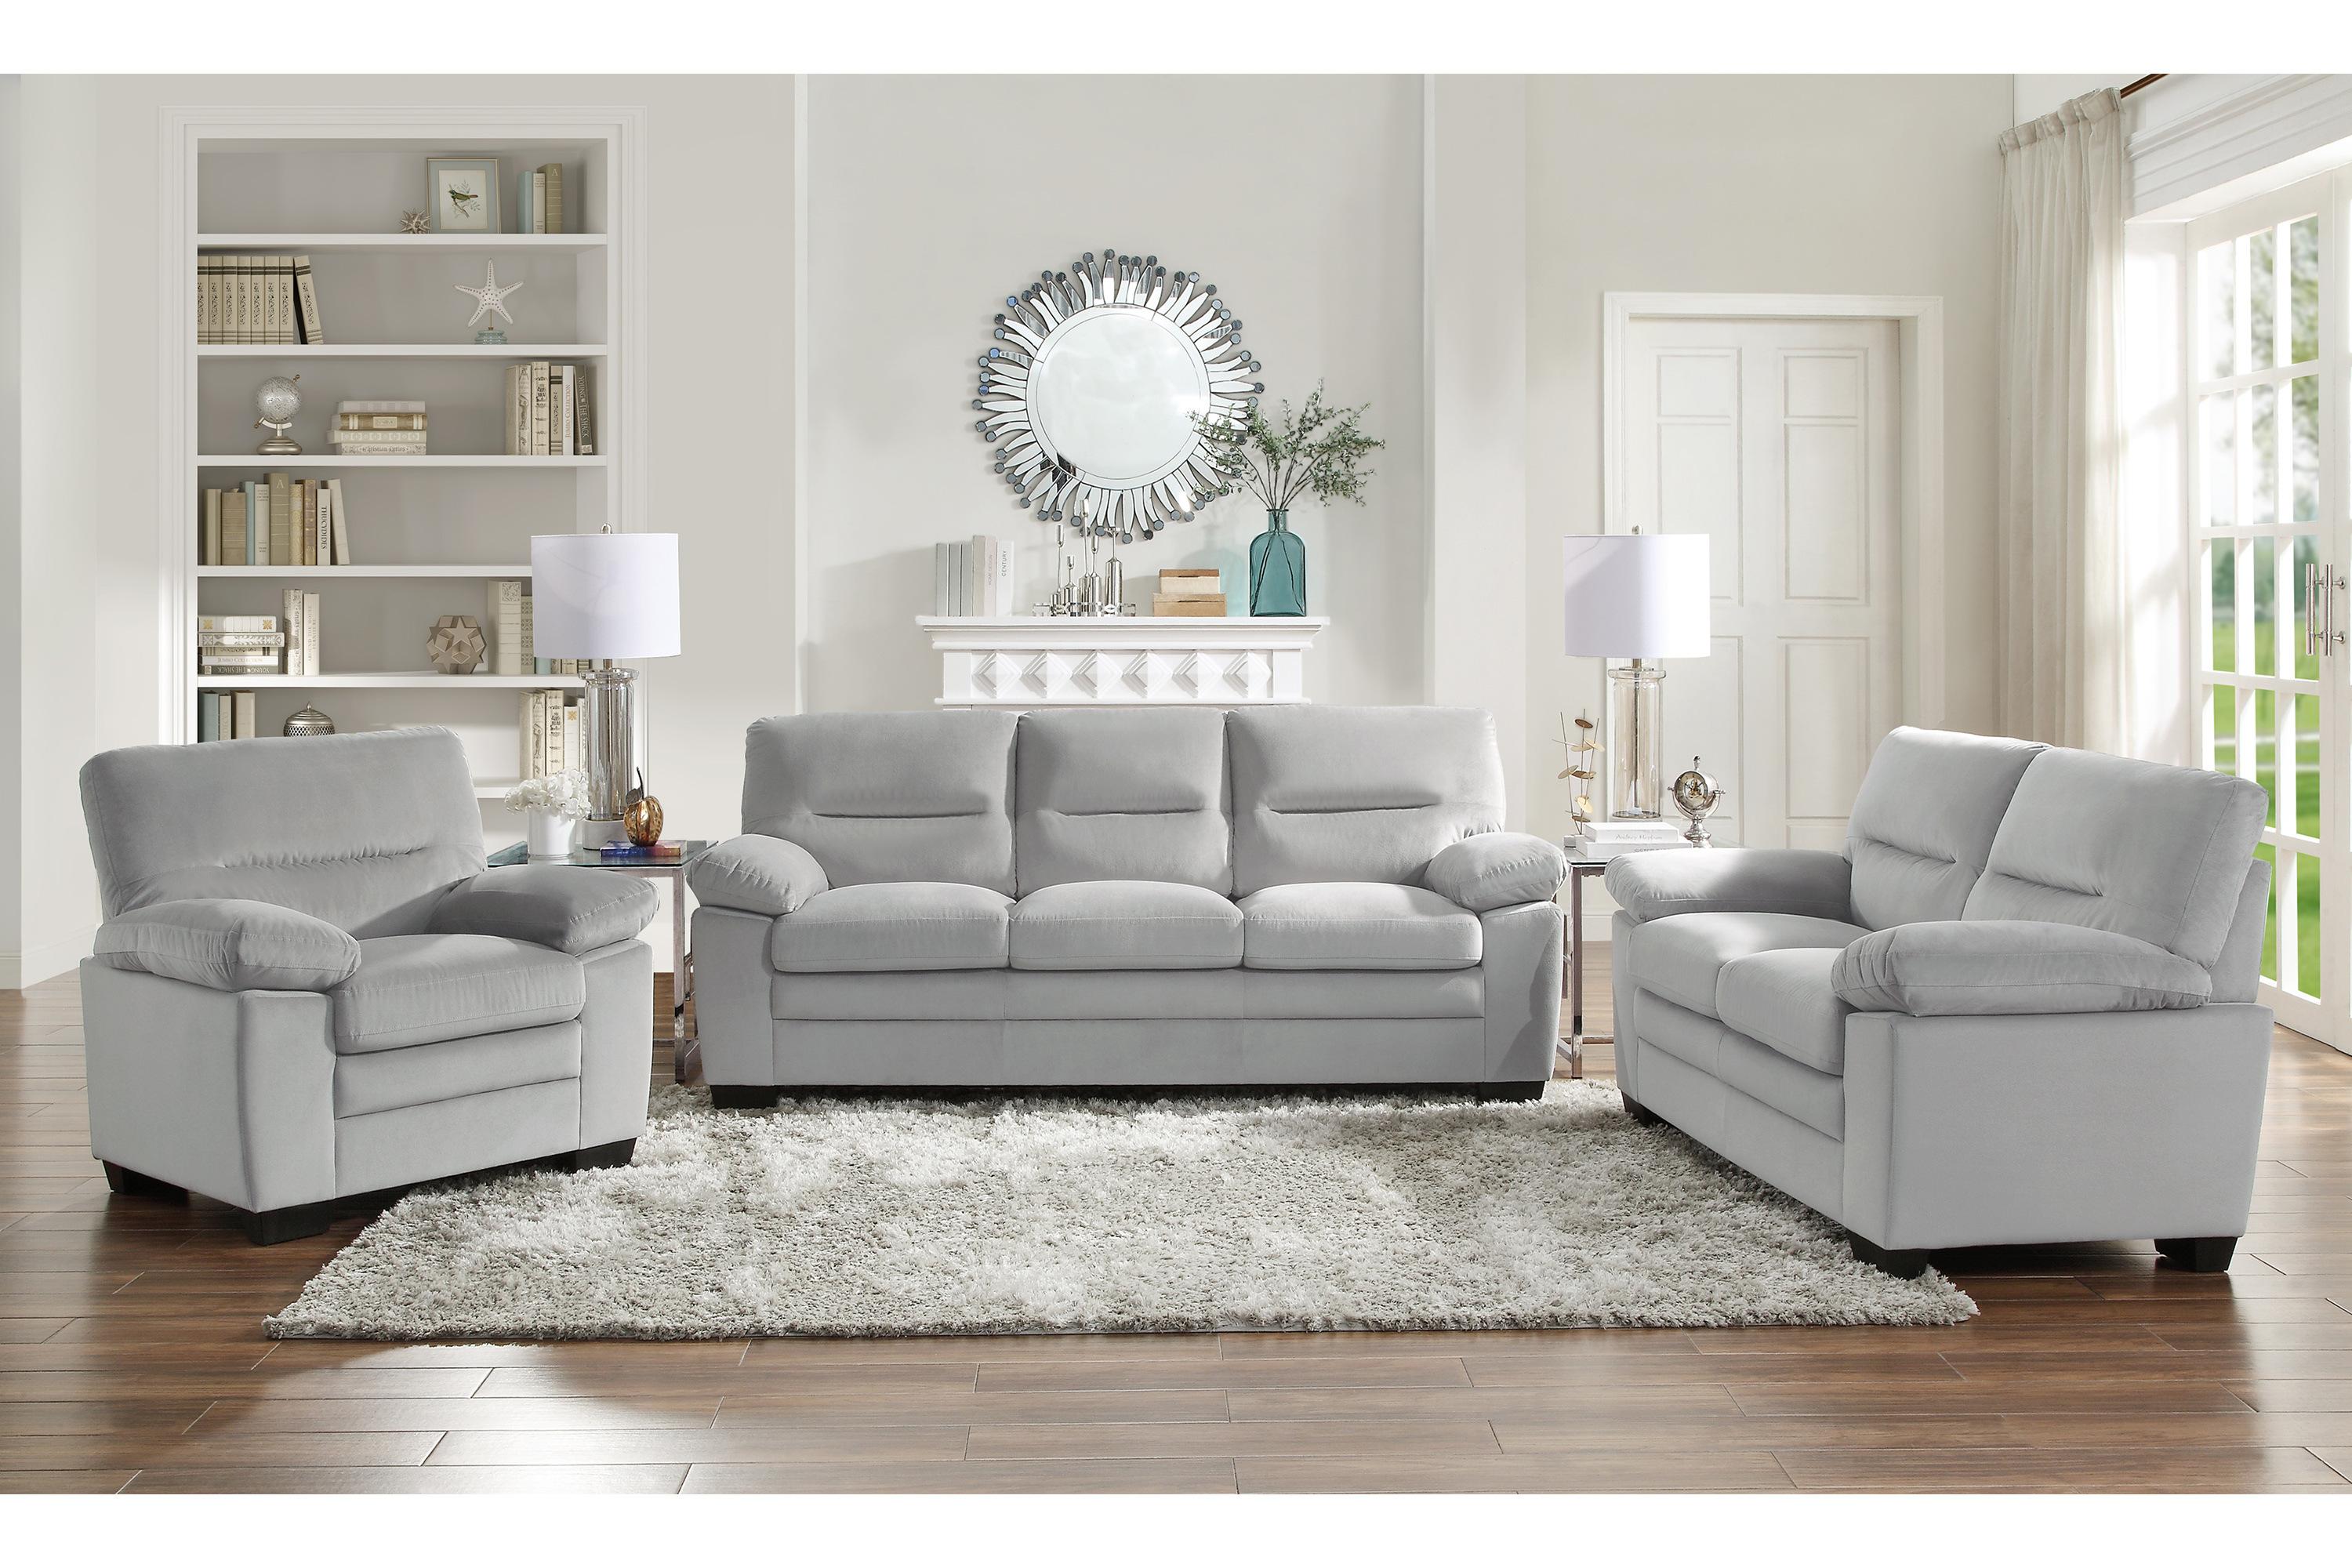 Modern Living Room Set 9328GY-3PC Keighly 9328GY-3PC in Gray 